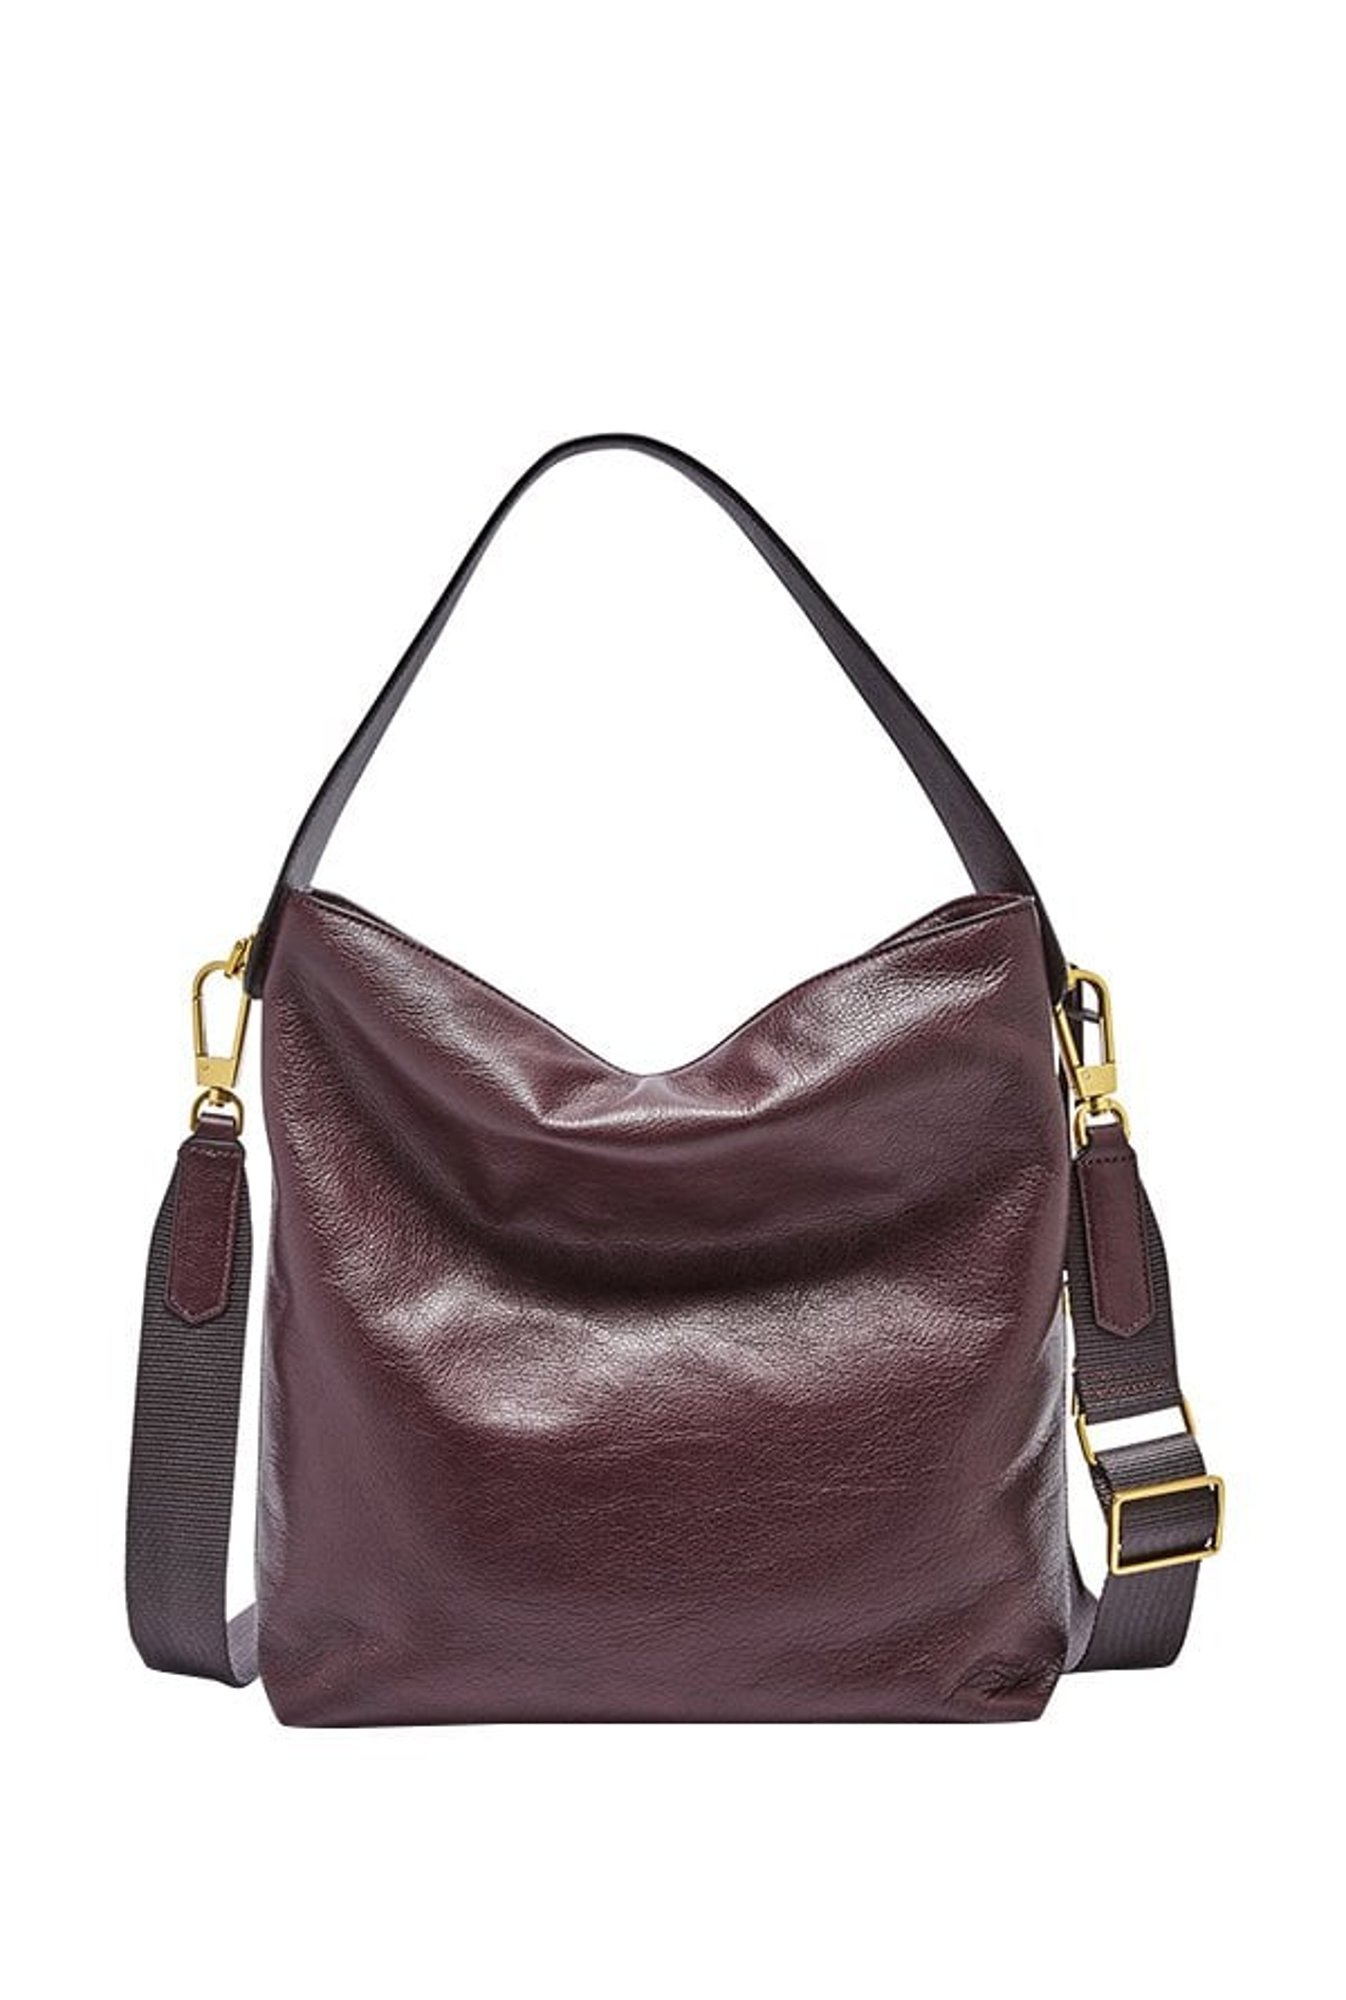 Vintage Fossil Emerson Hobo Bag by Fossil | Shop THRILLING